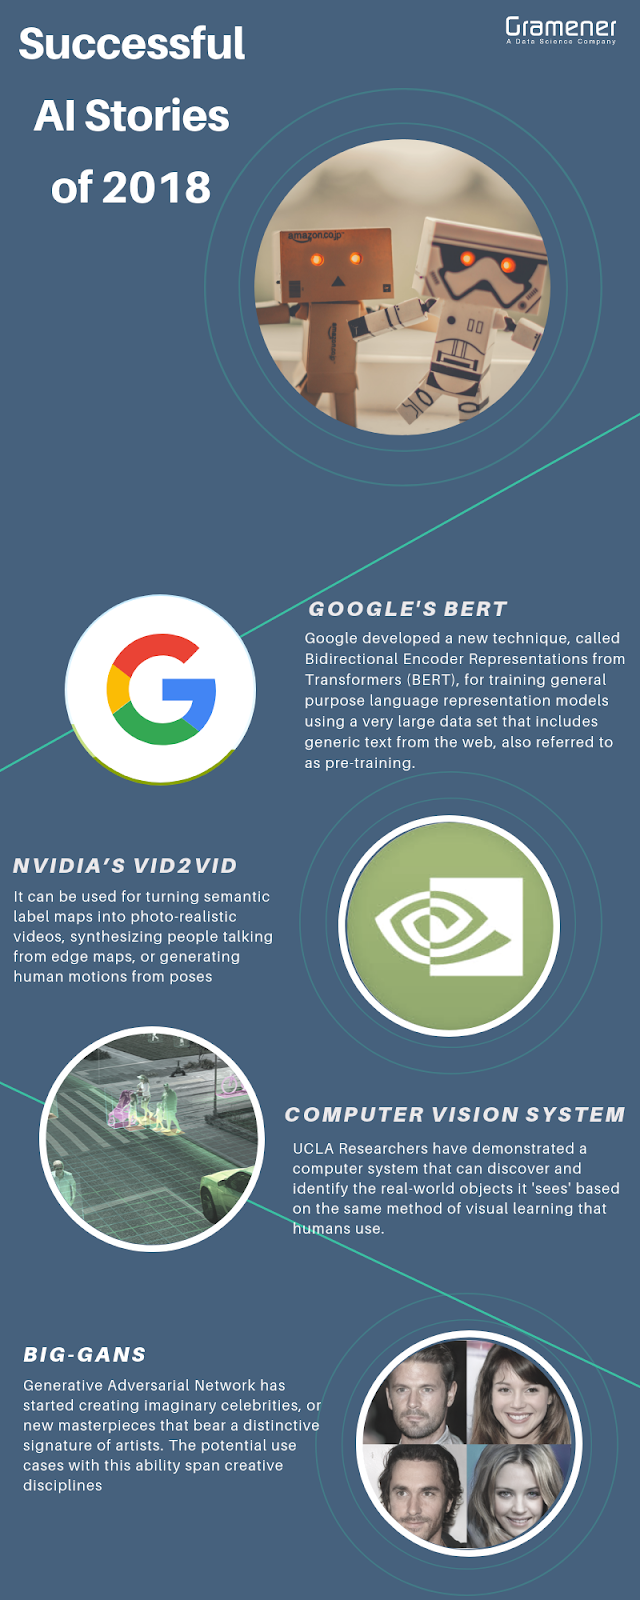 Infographic for successful Artificial Intelligence trends in 2018 for the "Will Enterprises Reap the Benefits of Artificial Intelligence in 2019?" Blog post